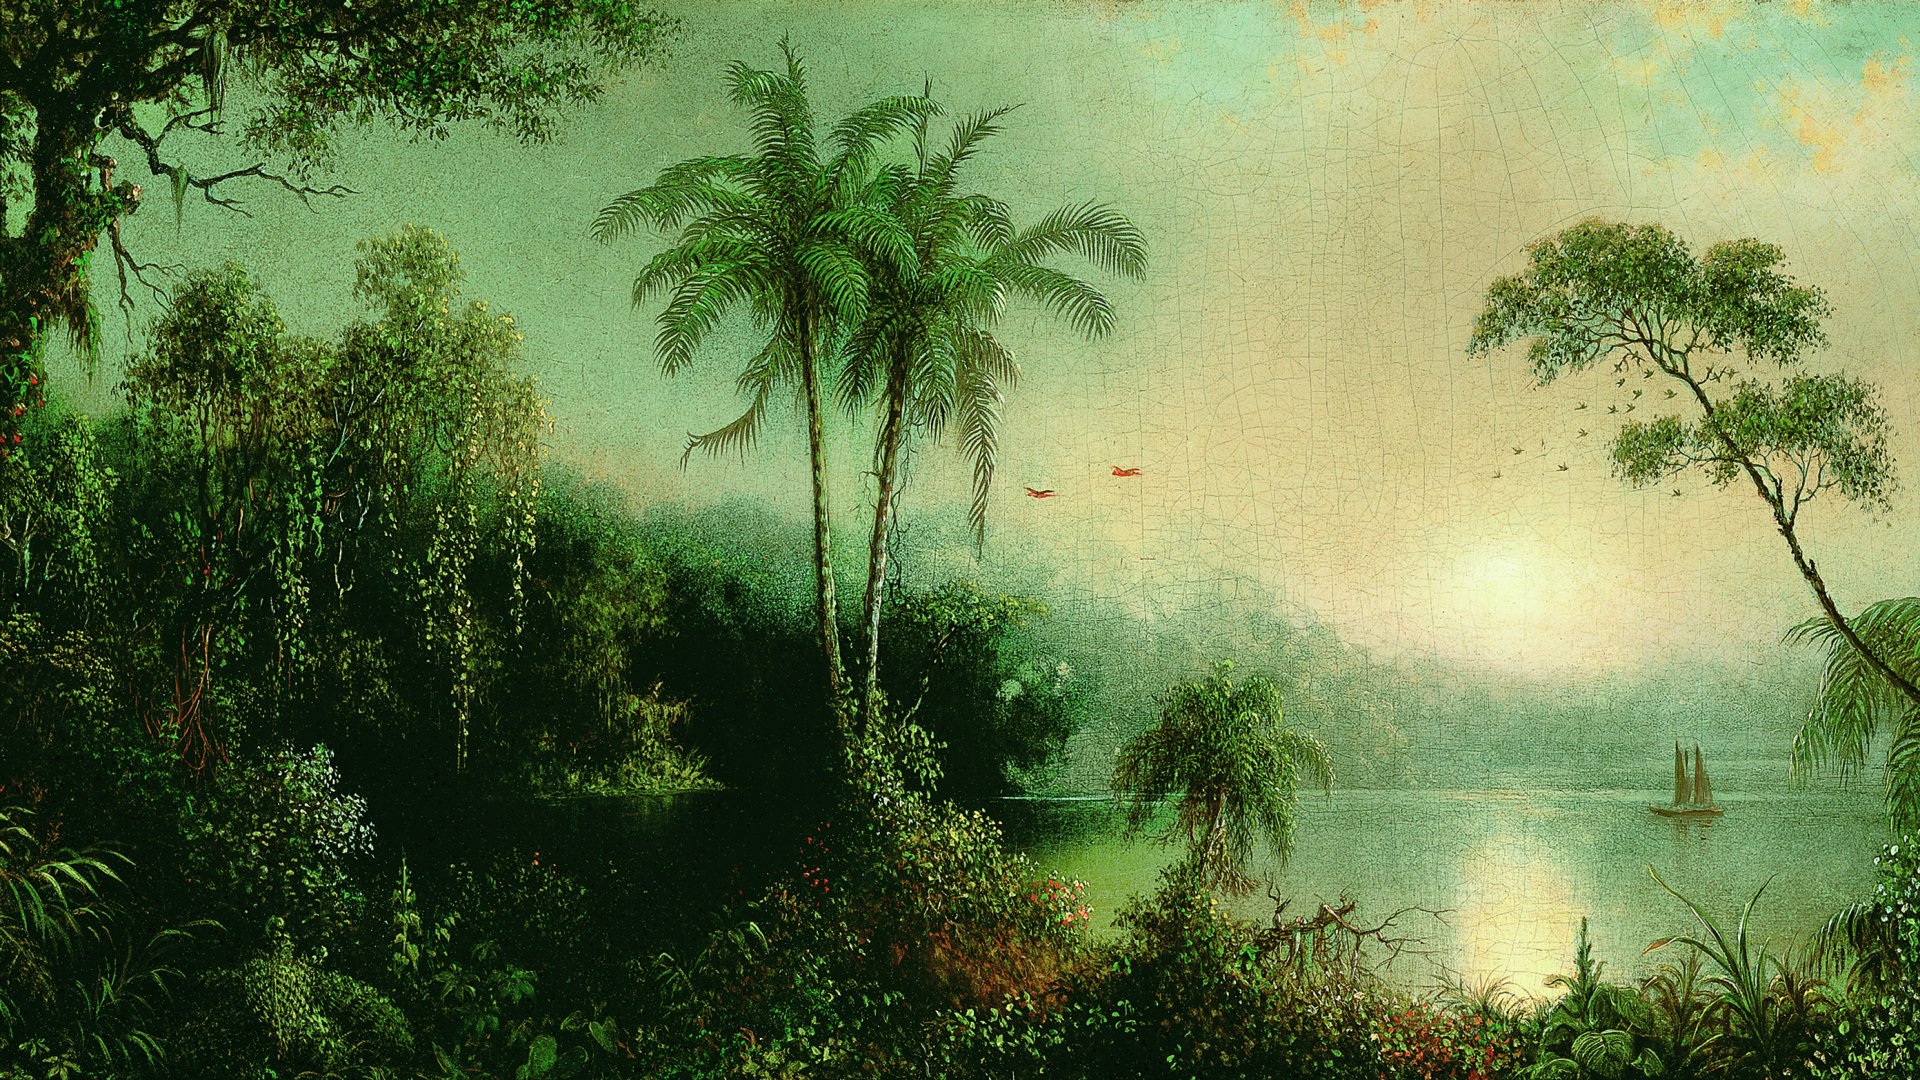 General 1920x1080 nature landscape Nicaragua painting artwork palm trees jungle water trees sailing ship clouds classic art